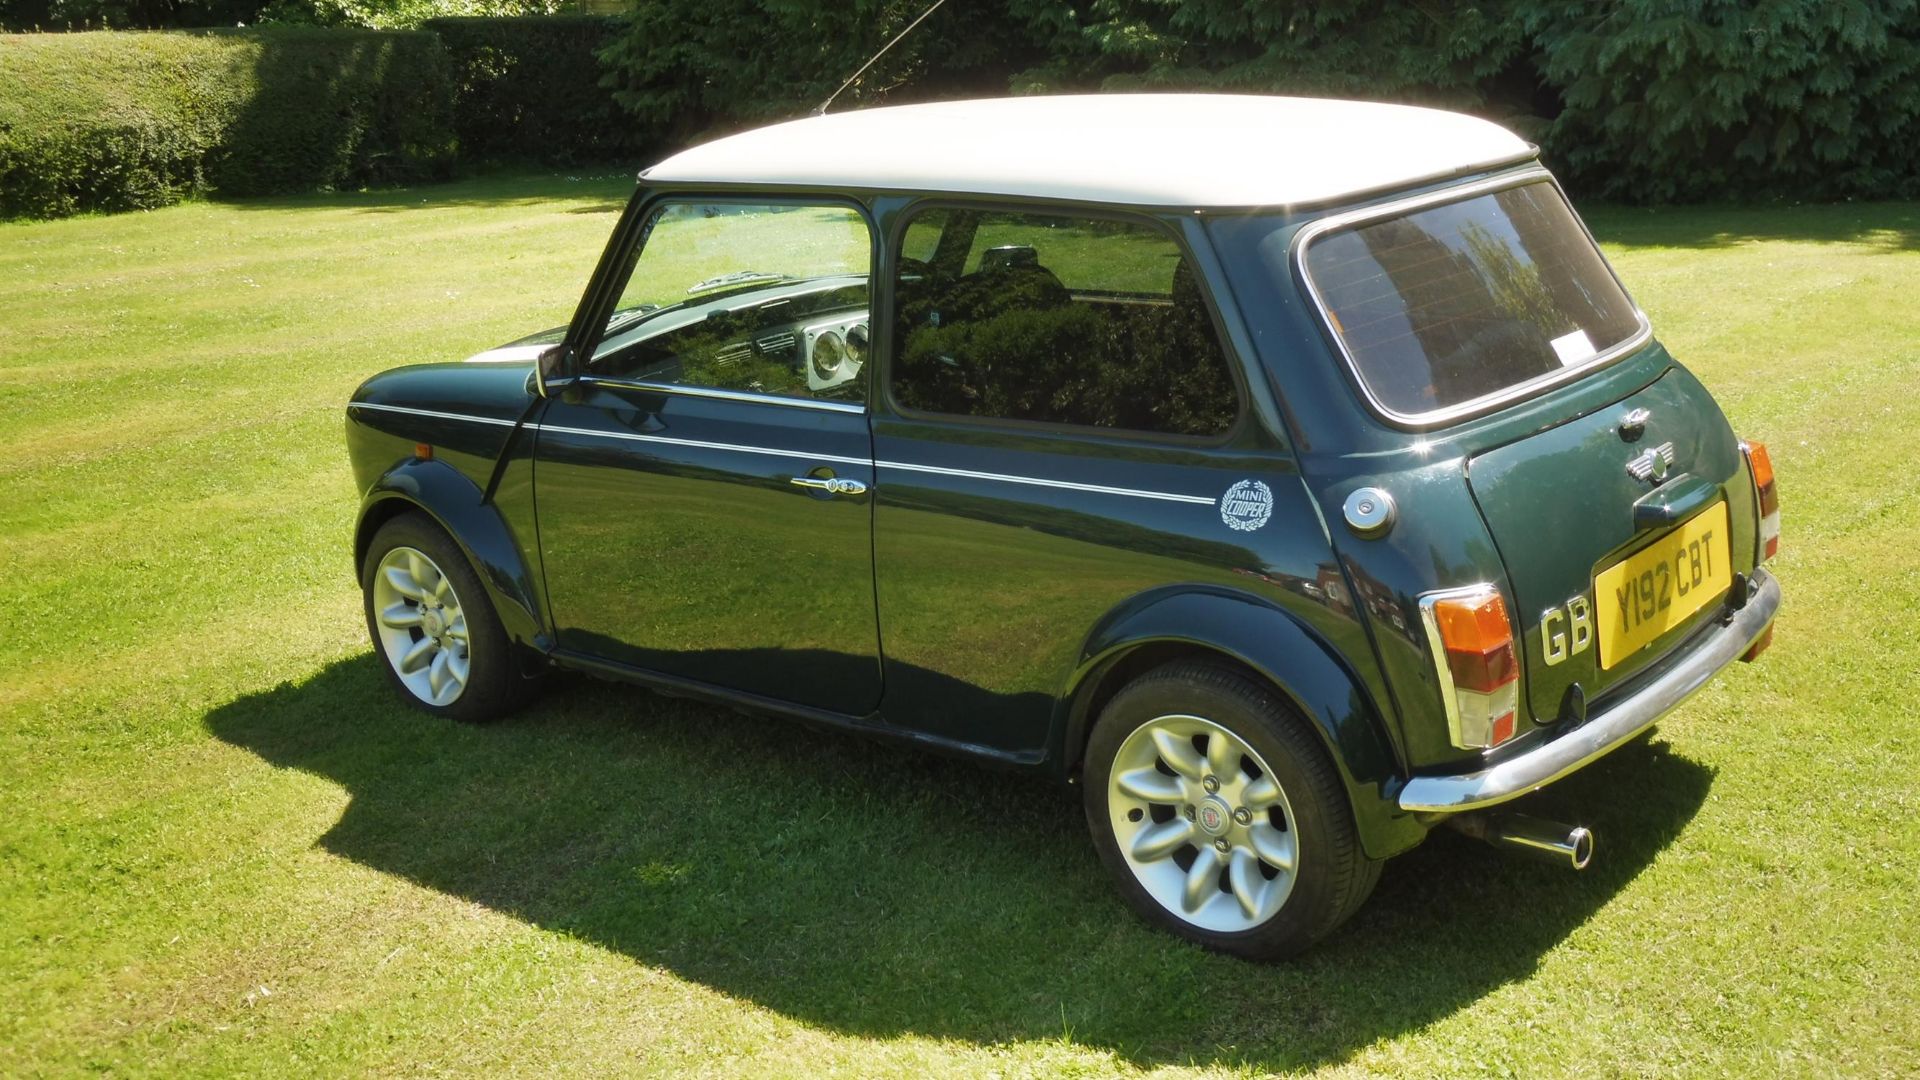 2001 Rover Mini Cooper 40th Anniversary Limited-Edition Automatic - Image 8 of 8